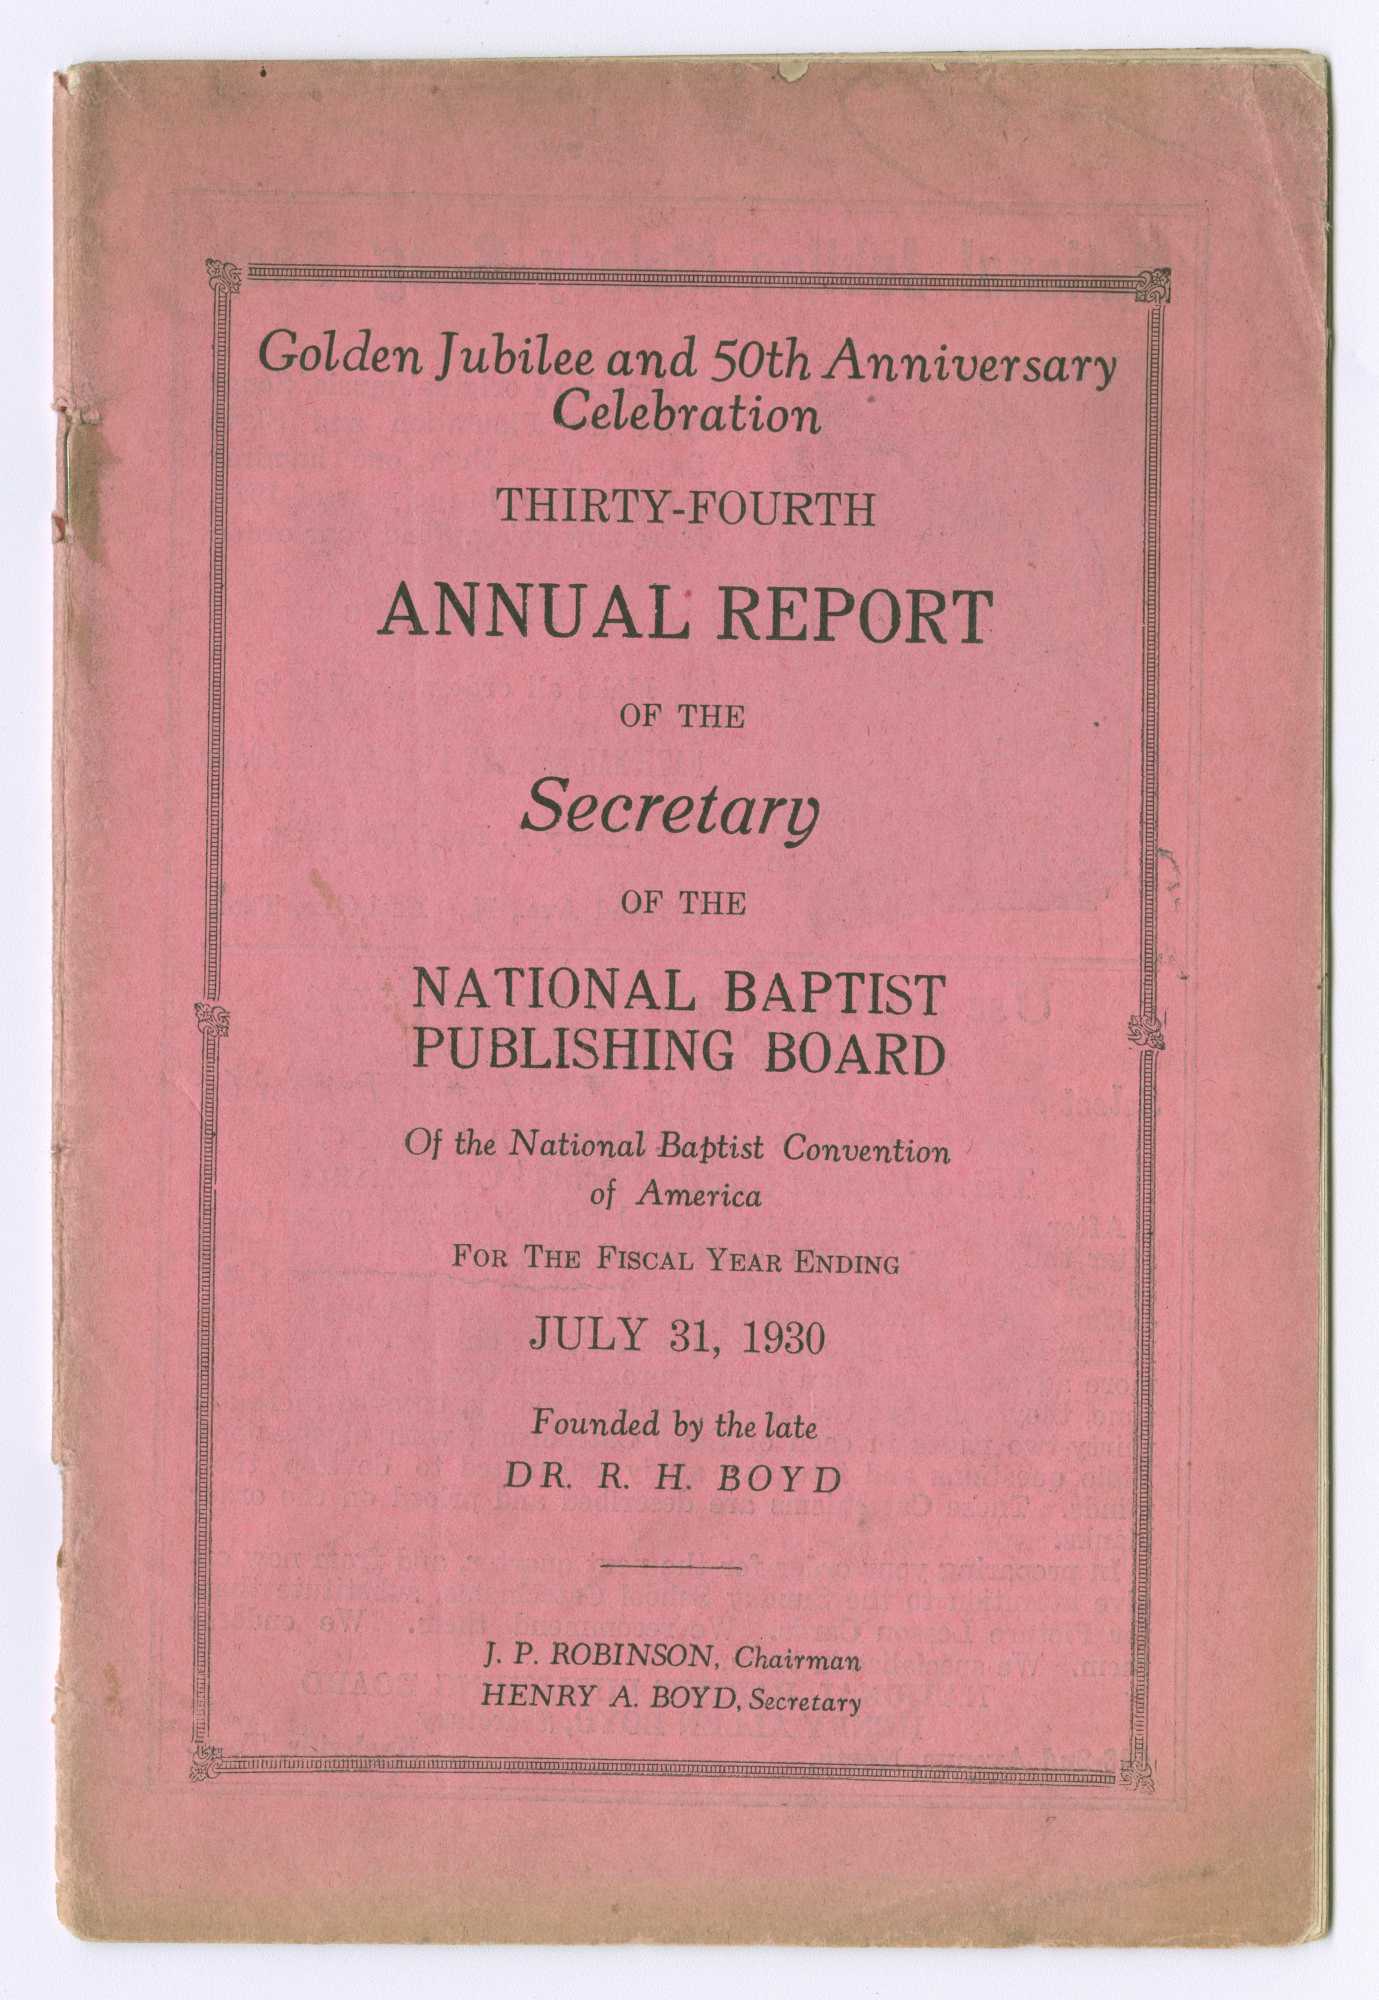 A report titled Golden Jubilee and 50th Anniversary Celebration of the National Baptist Publishing Board printed in black ink on pink colored paper.